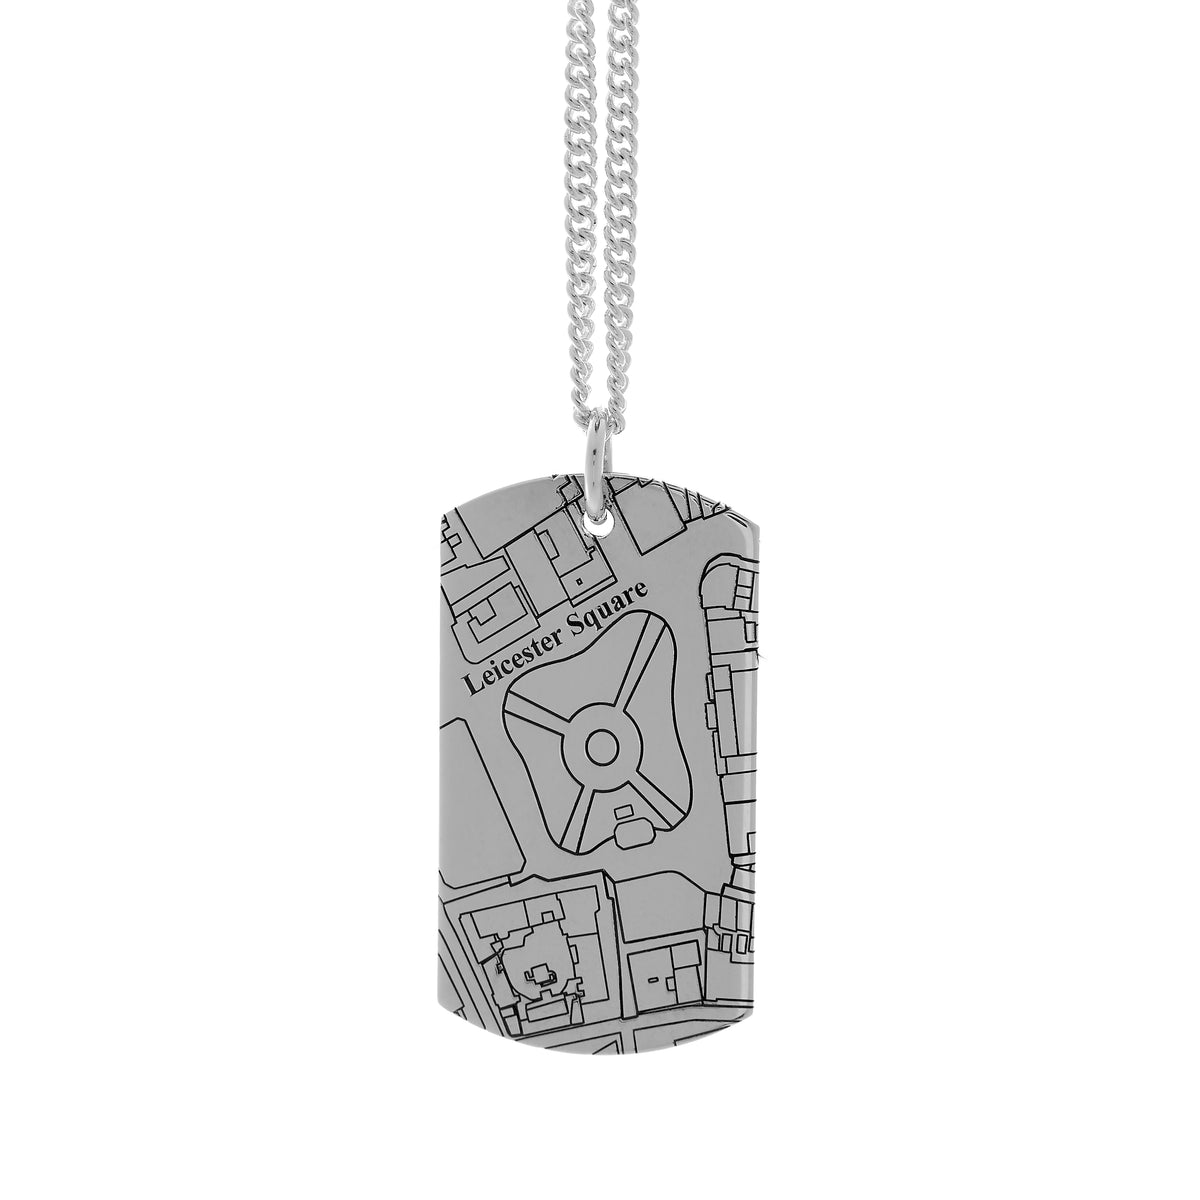 Recycled silver dog tag necklace engraved with custom street map location